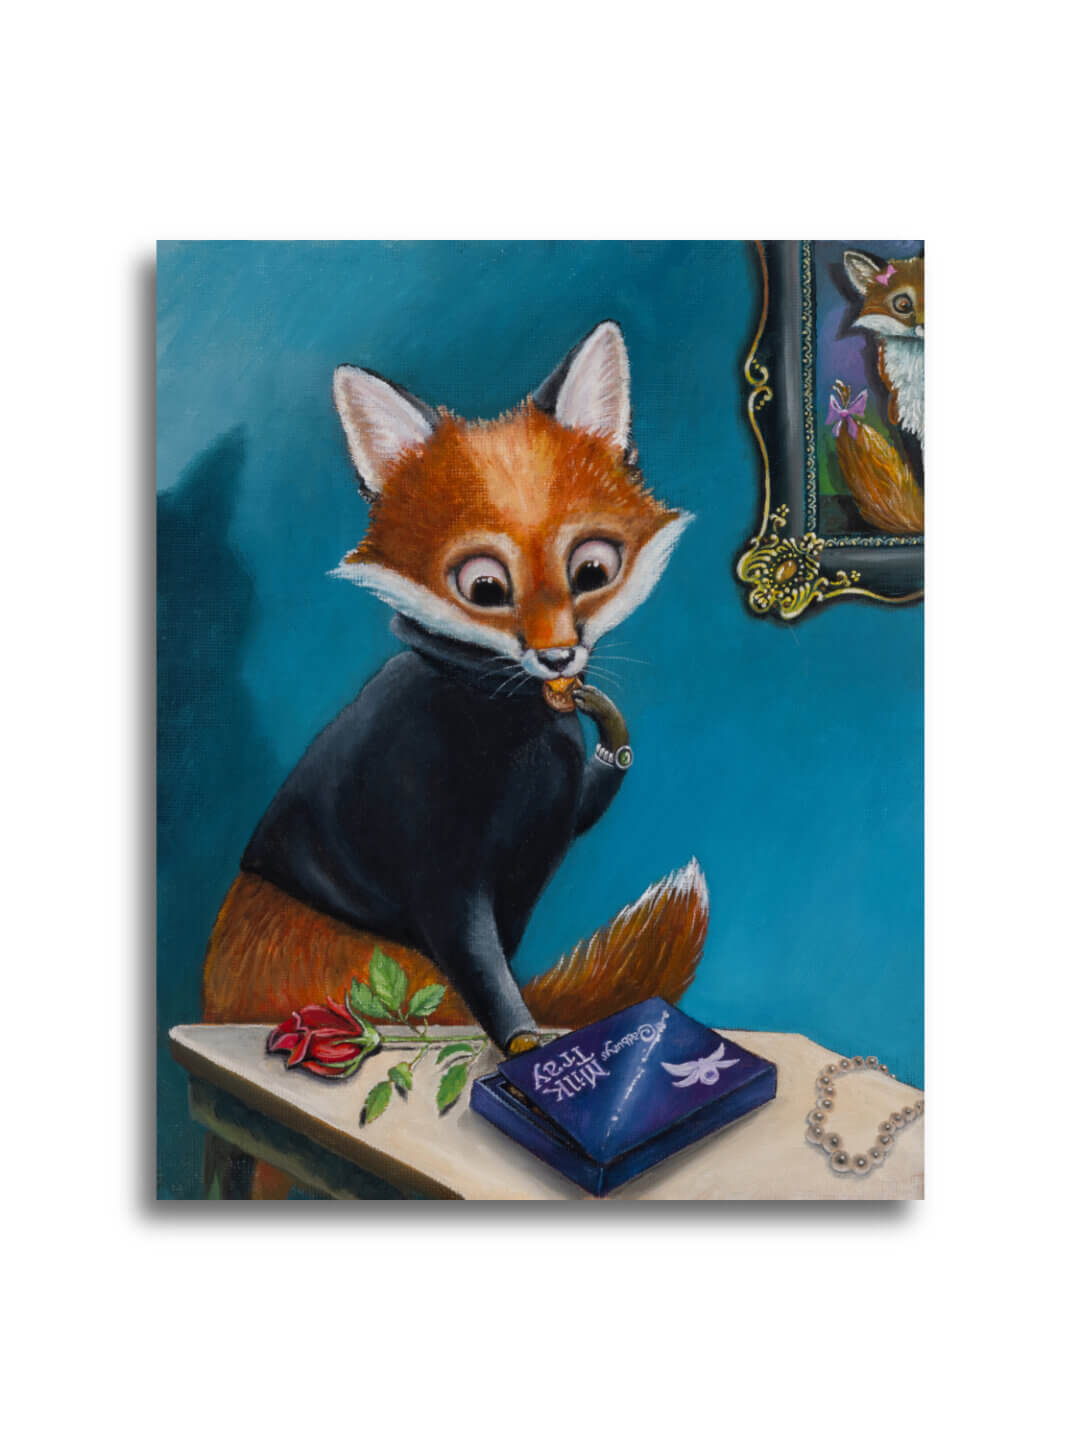 And All Because... Part of the 'Soup2Nuts' Collection by Ann Richmond - A Painting of a Ninja Fox who's just delivered a box of chocolates... Framing Available.